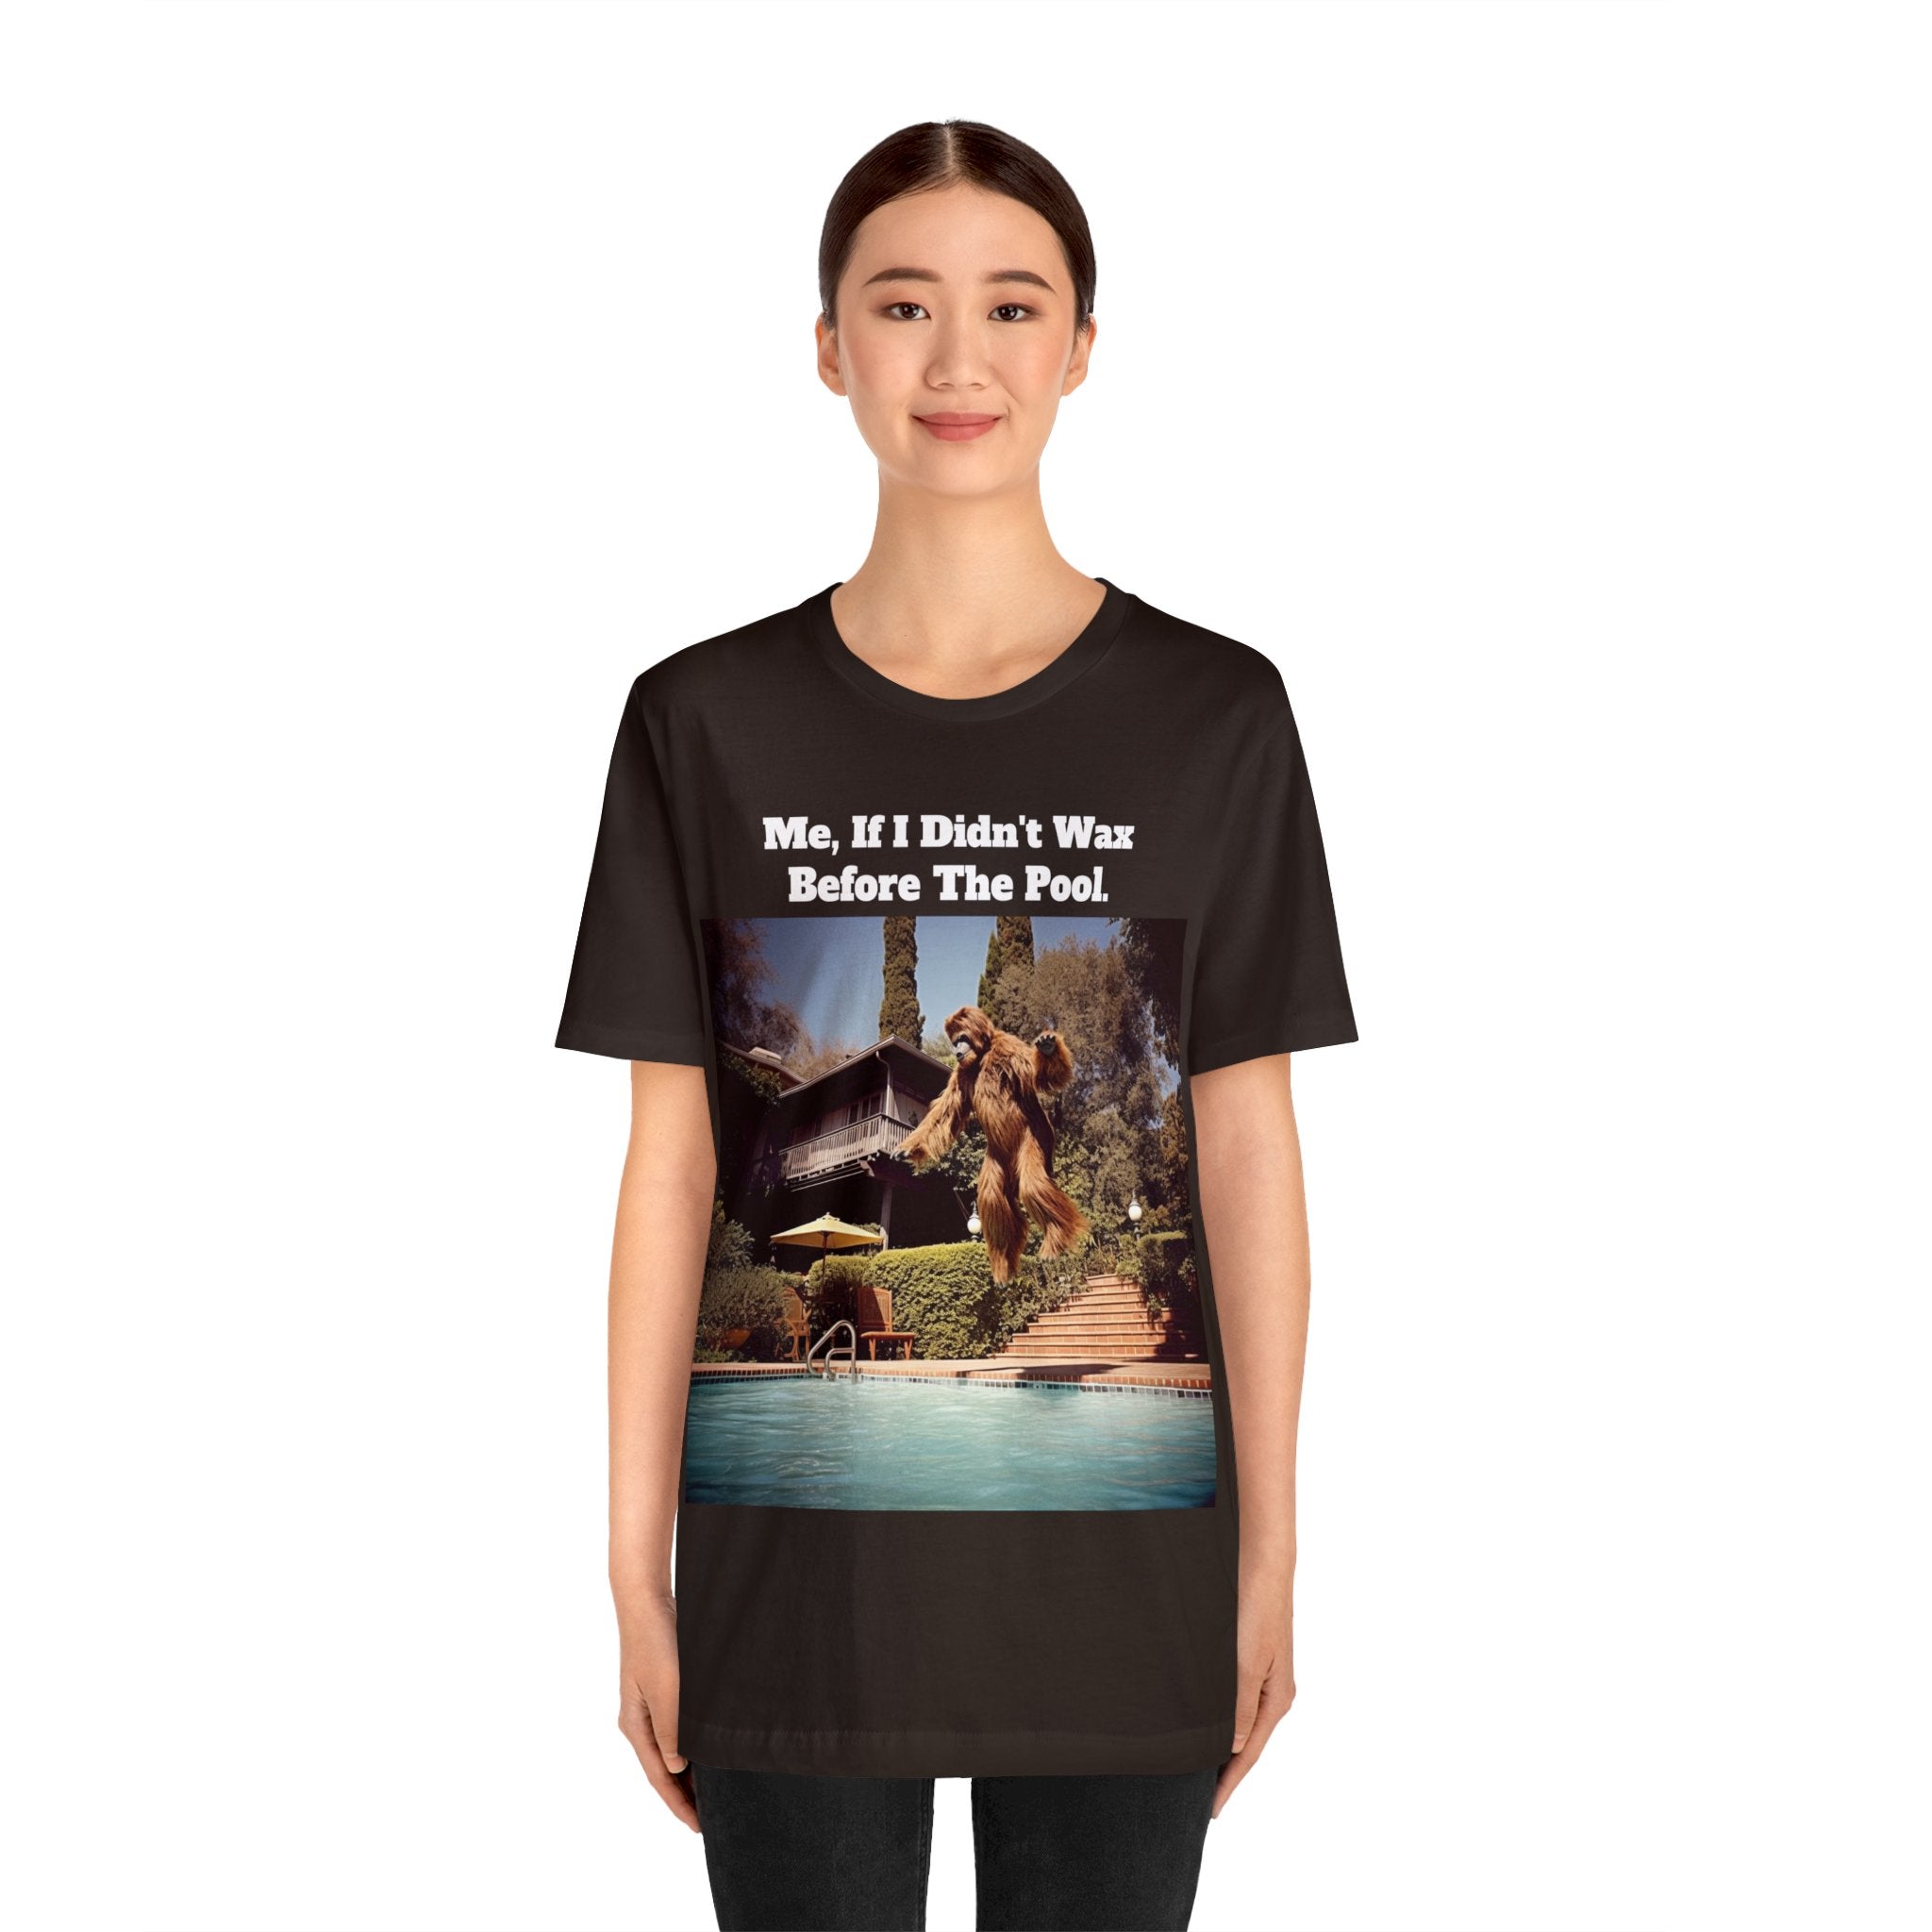 "Me, if I Didn't Wax Before the Pool" Hilarious Bigfoot-Inspired Unisex Jersey Short Sleeve Tee - Retro Hollywood Style, Poolside Laughter & Grooming Humor: Trendy Summer Fashion Must-Have